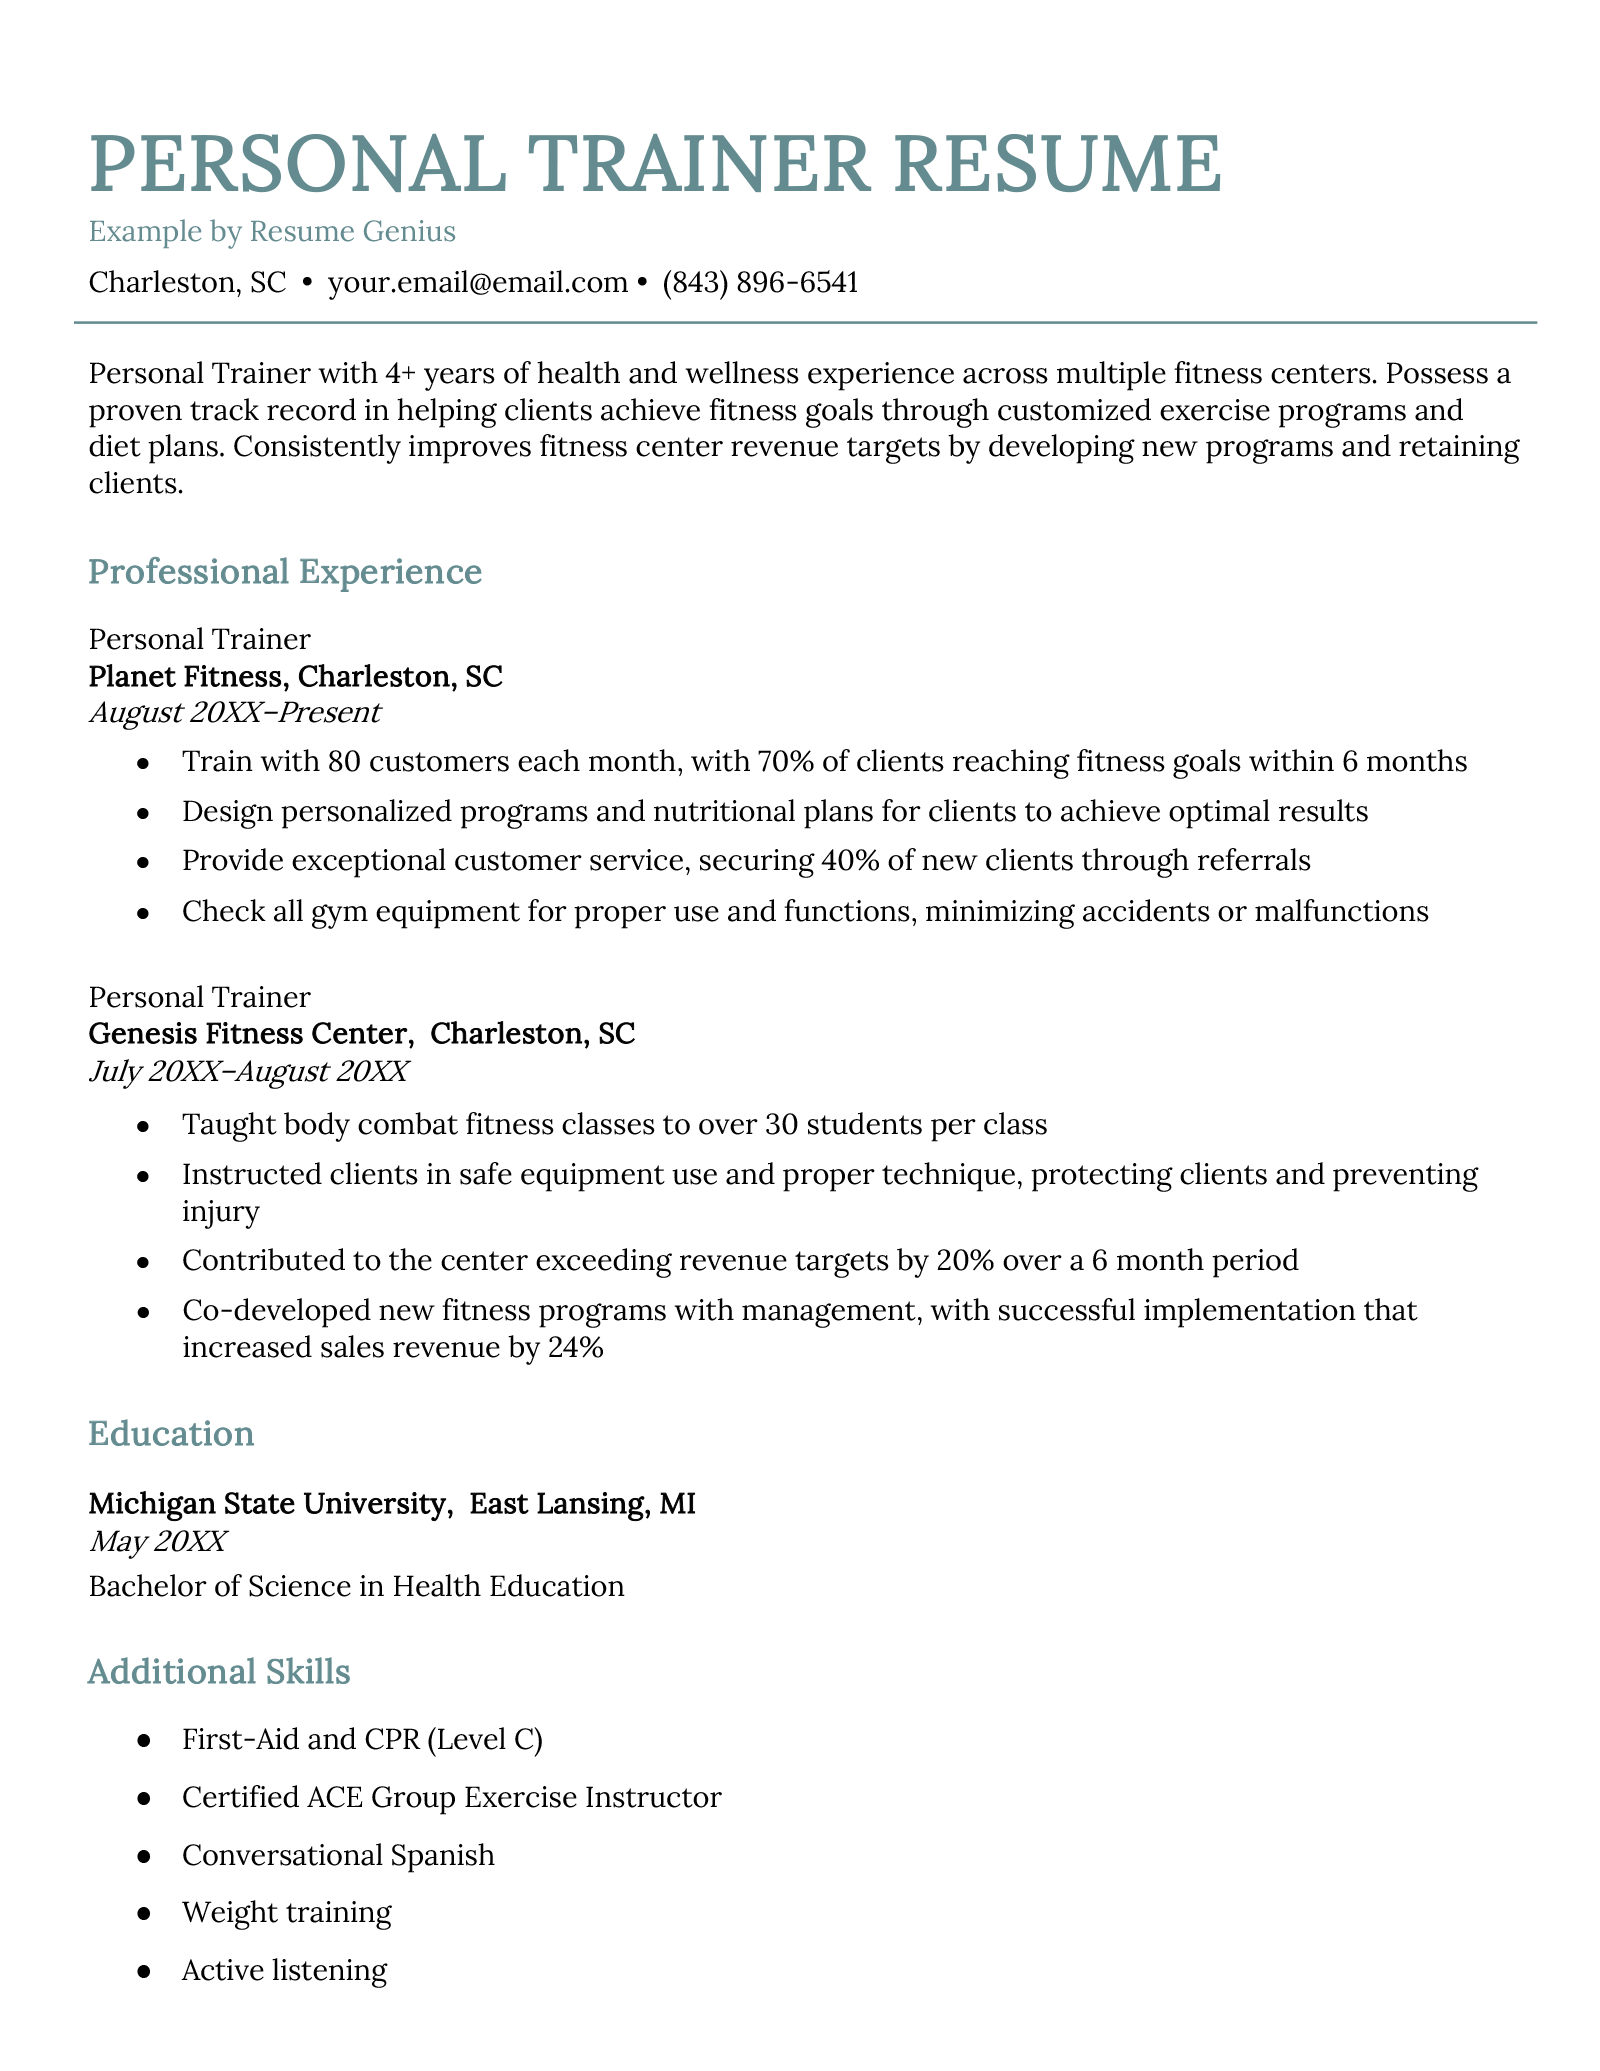 Personal Training Resume Template